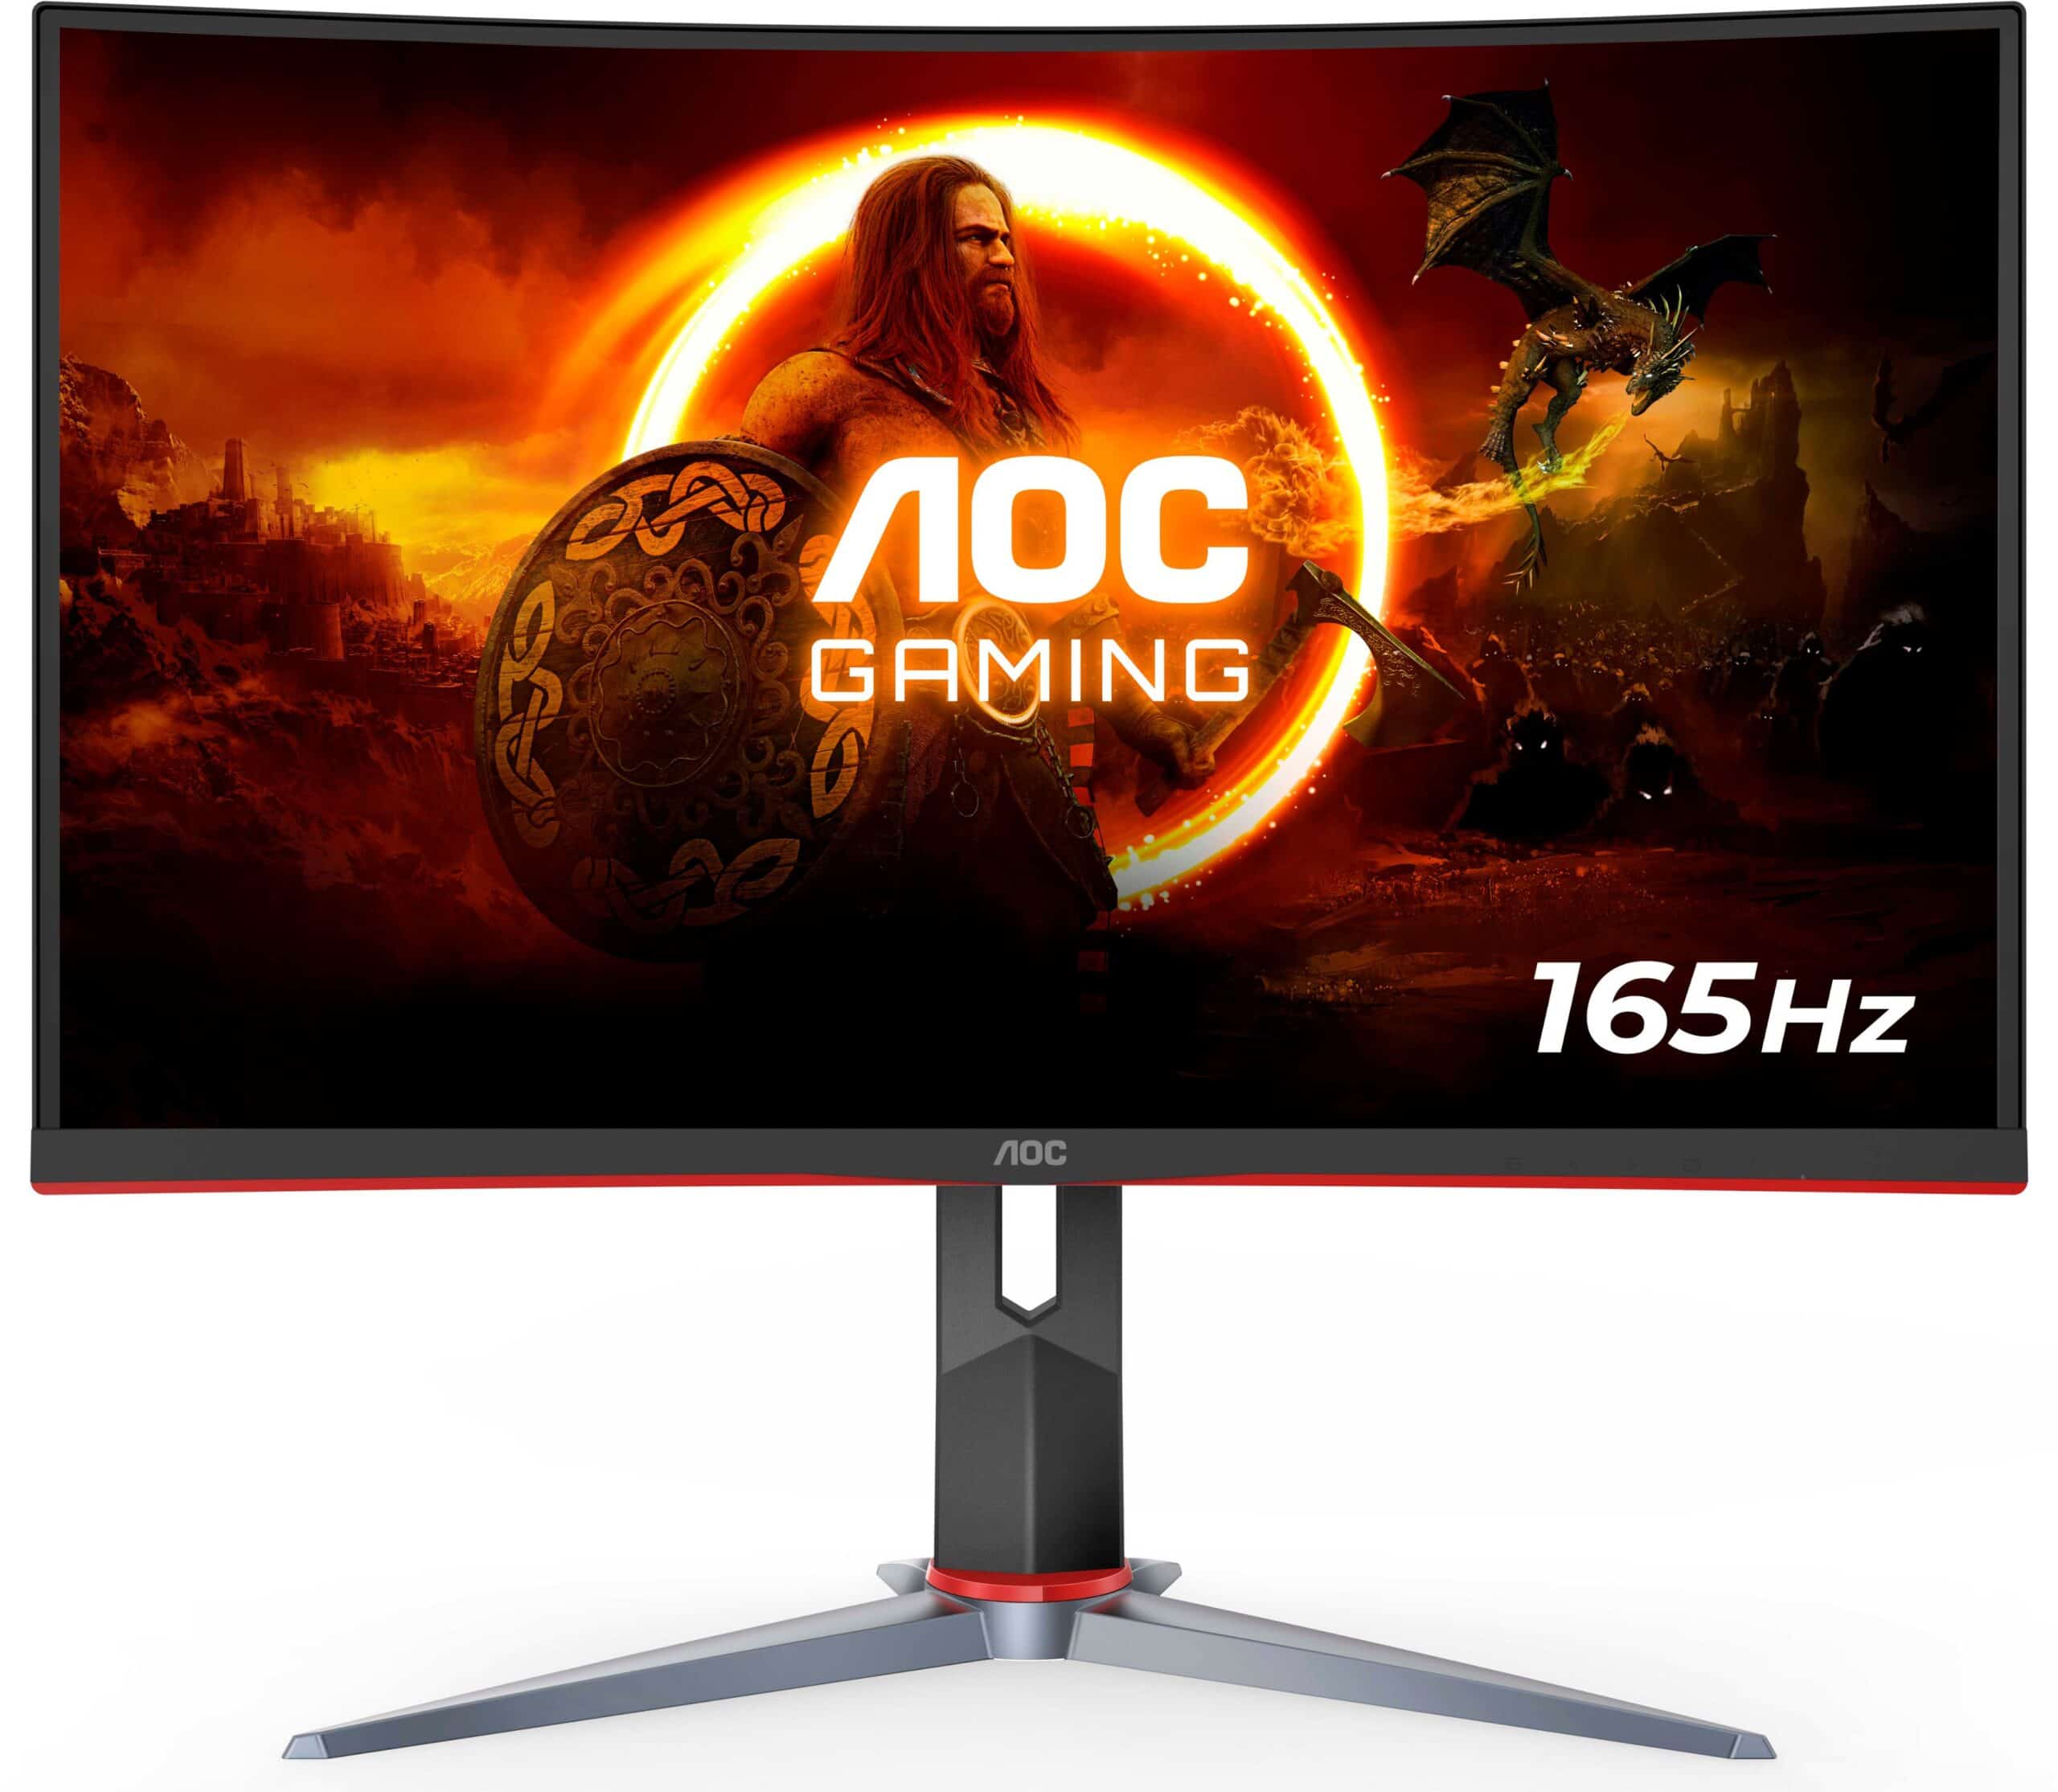 Why Can I Only Choose 60Hz on my 165Hz Monitor? - GadgetMates